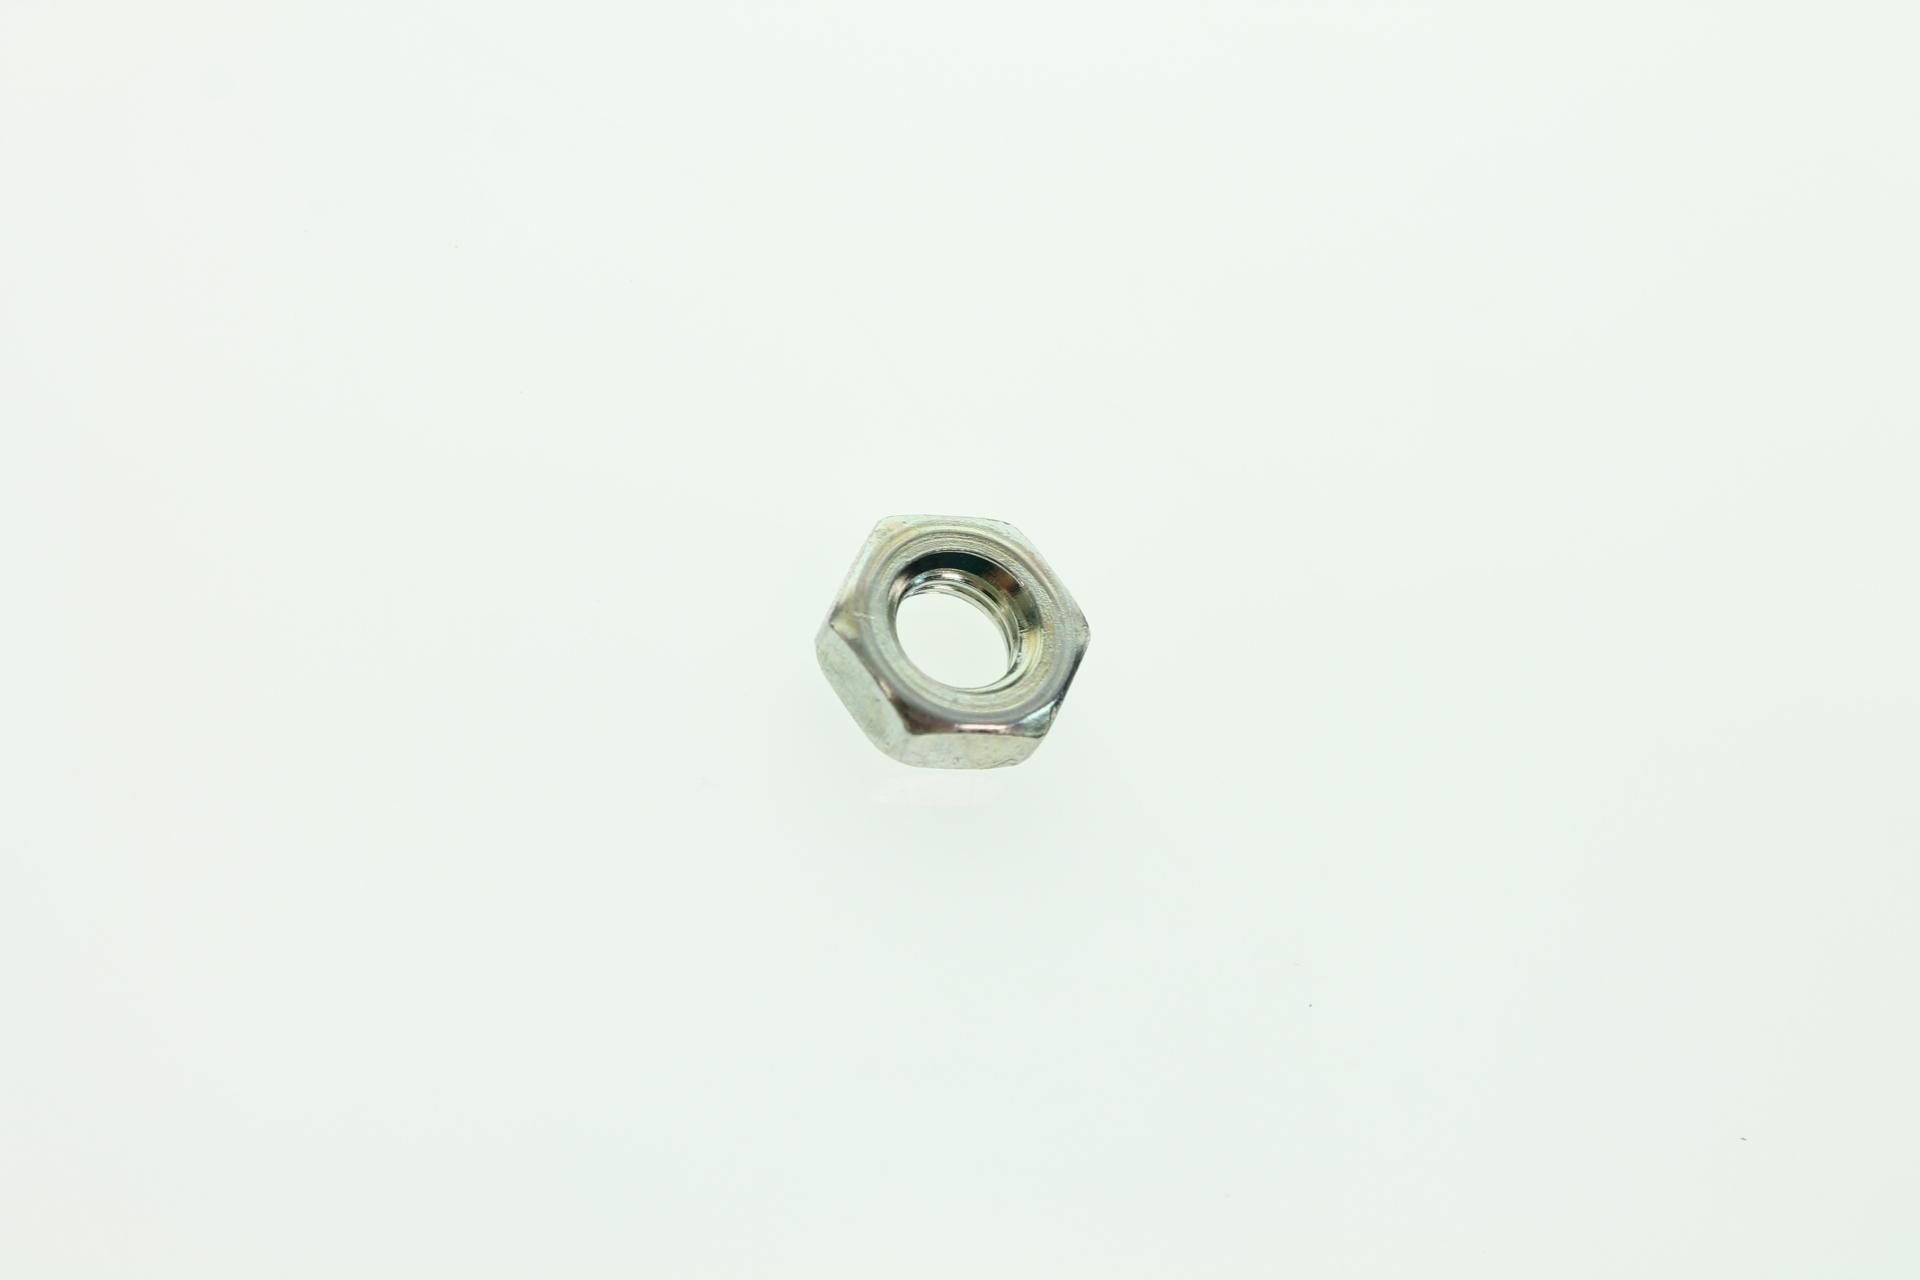 00000-00031 Superseded by 94002-06000-0S - NUT, HEX. (6MM)